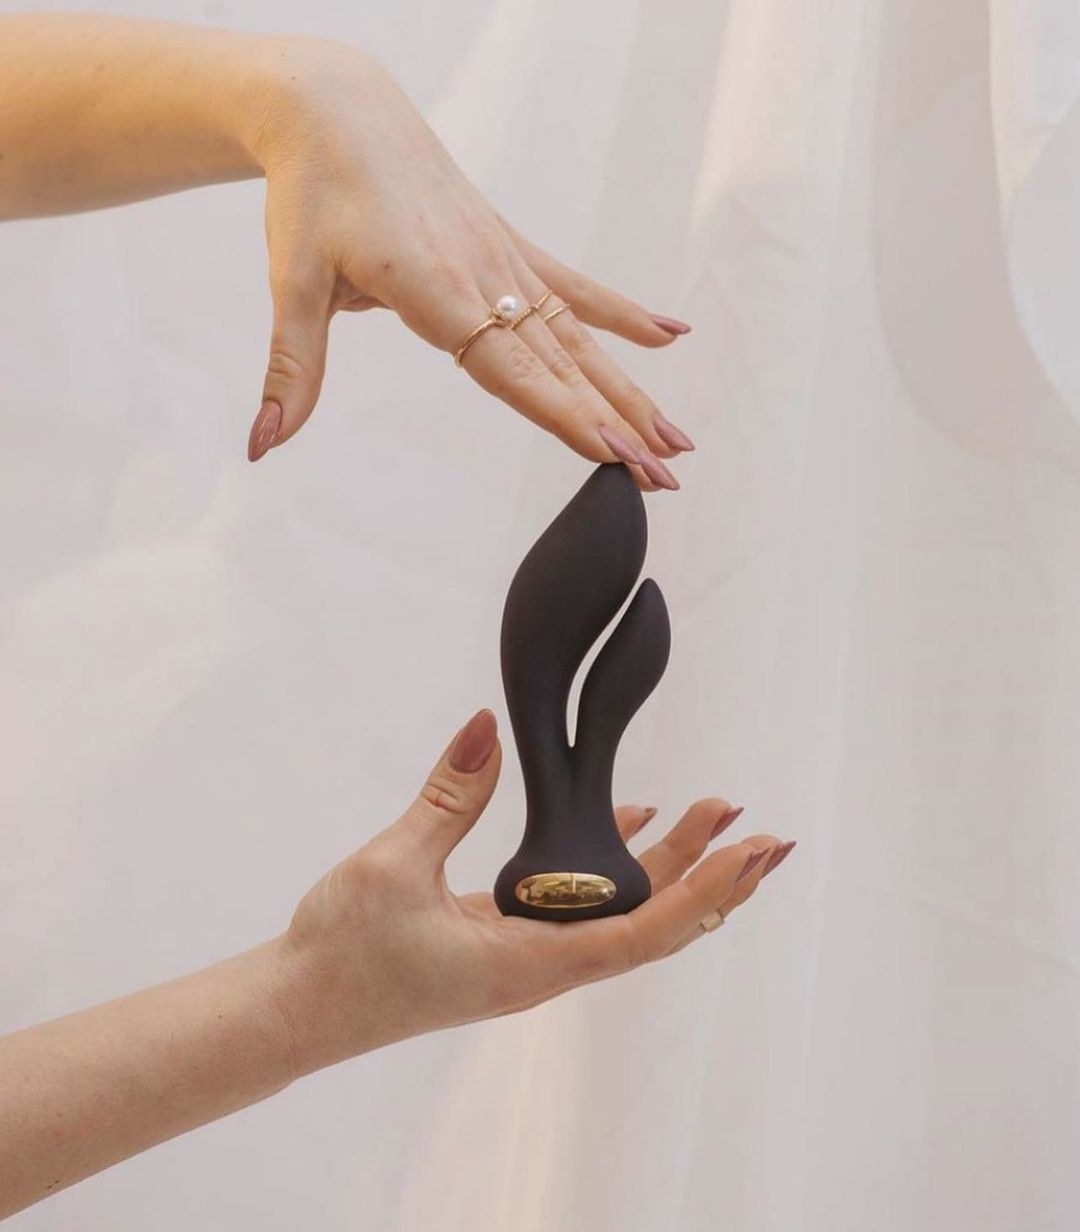 The vibrator, which has two separate curved fins for clit and G spot stimulation